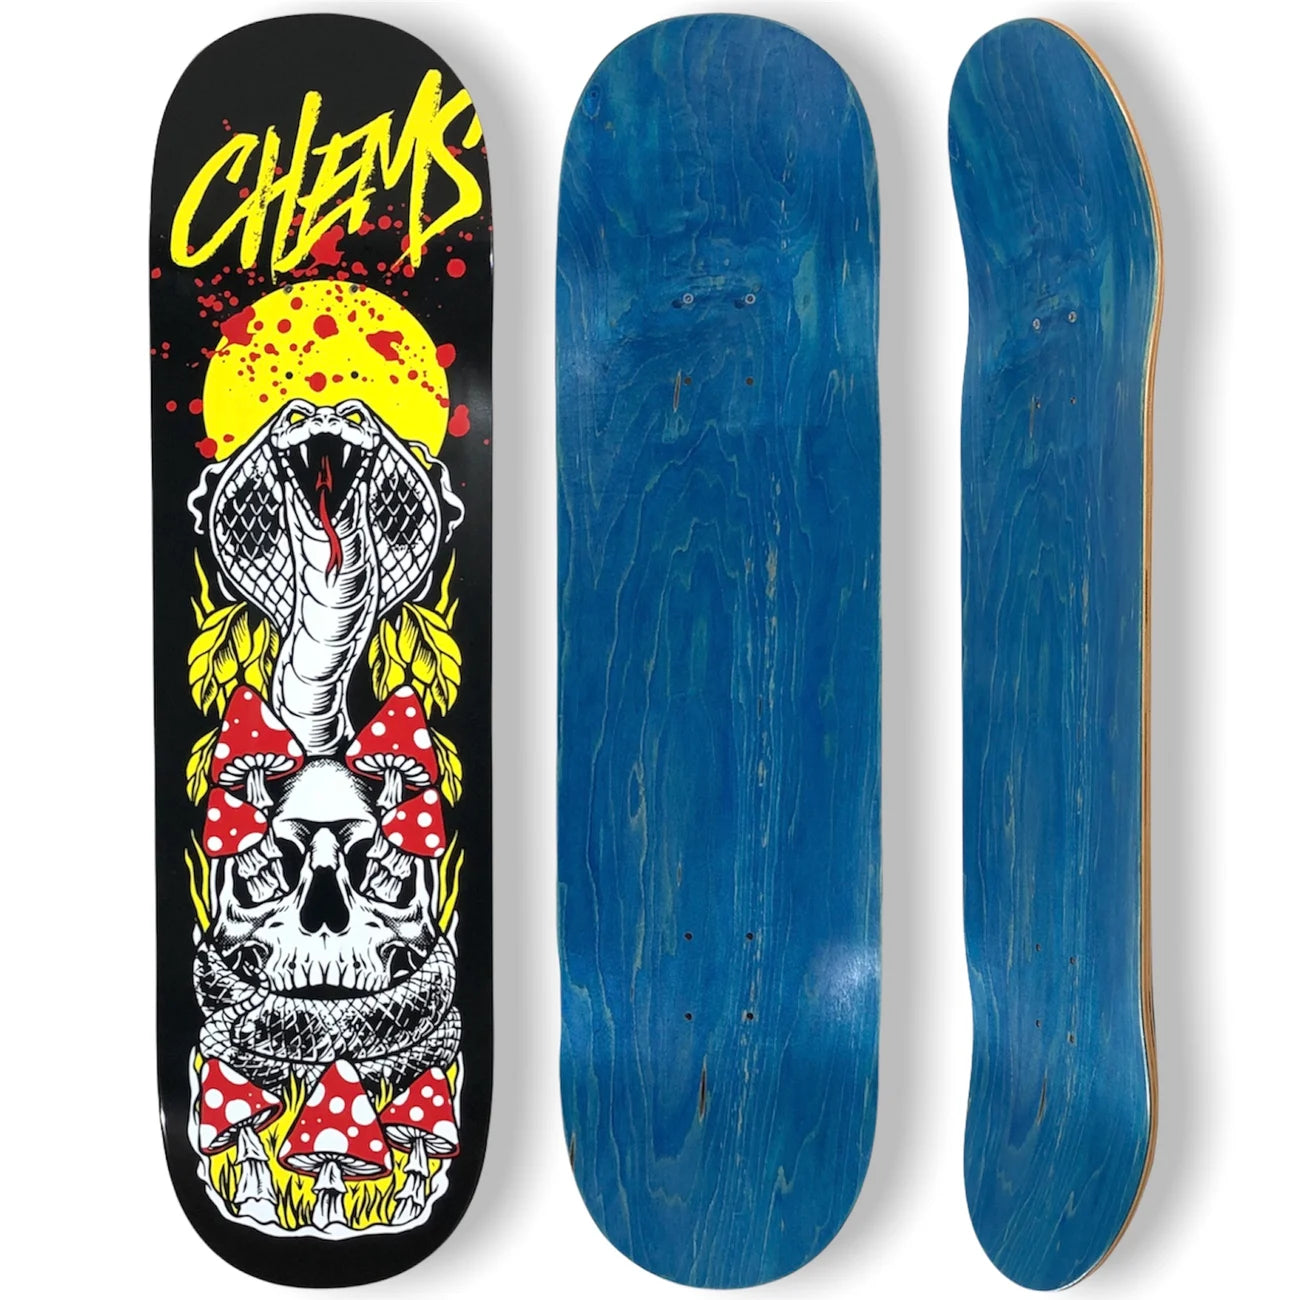 Chems Cobra Skateboard Deck; Black background with a yellow Chems logo at the top; Striking graphic featuring a cobra wrapped around a skull with mushrooms growing out of it; Eye-catching design for a unique and edgy aesthetic; Displays the blue stain on the top of the deck.